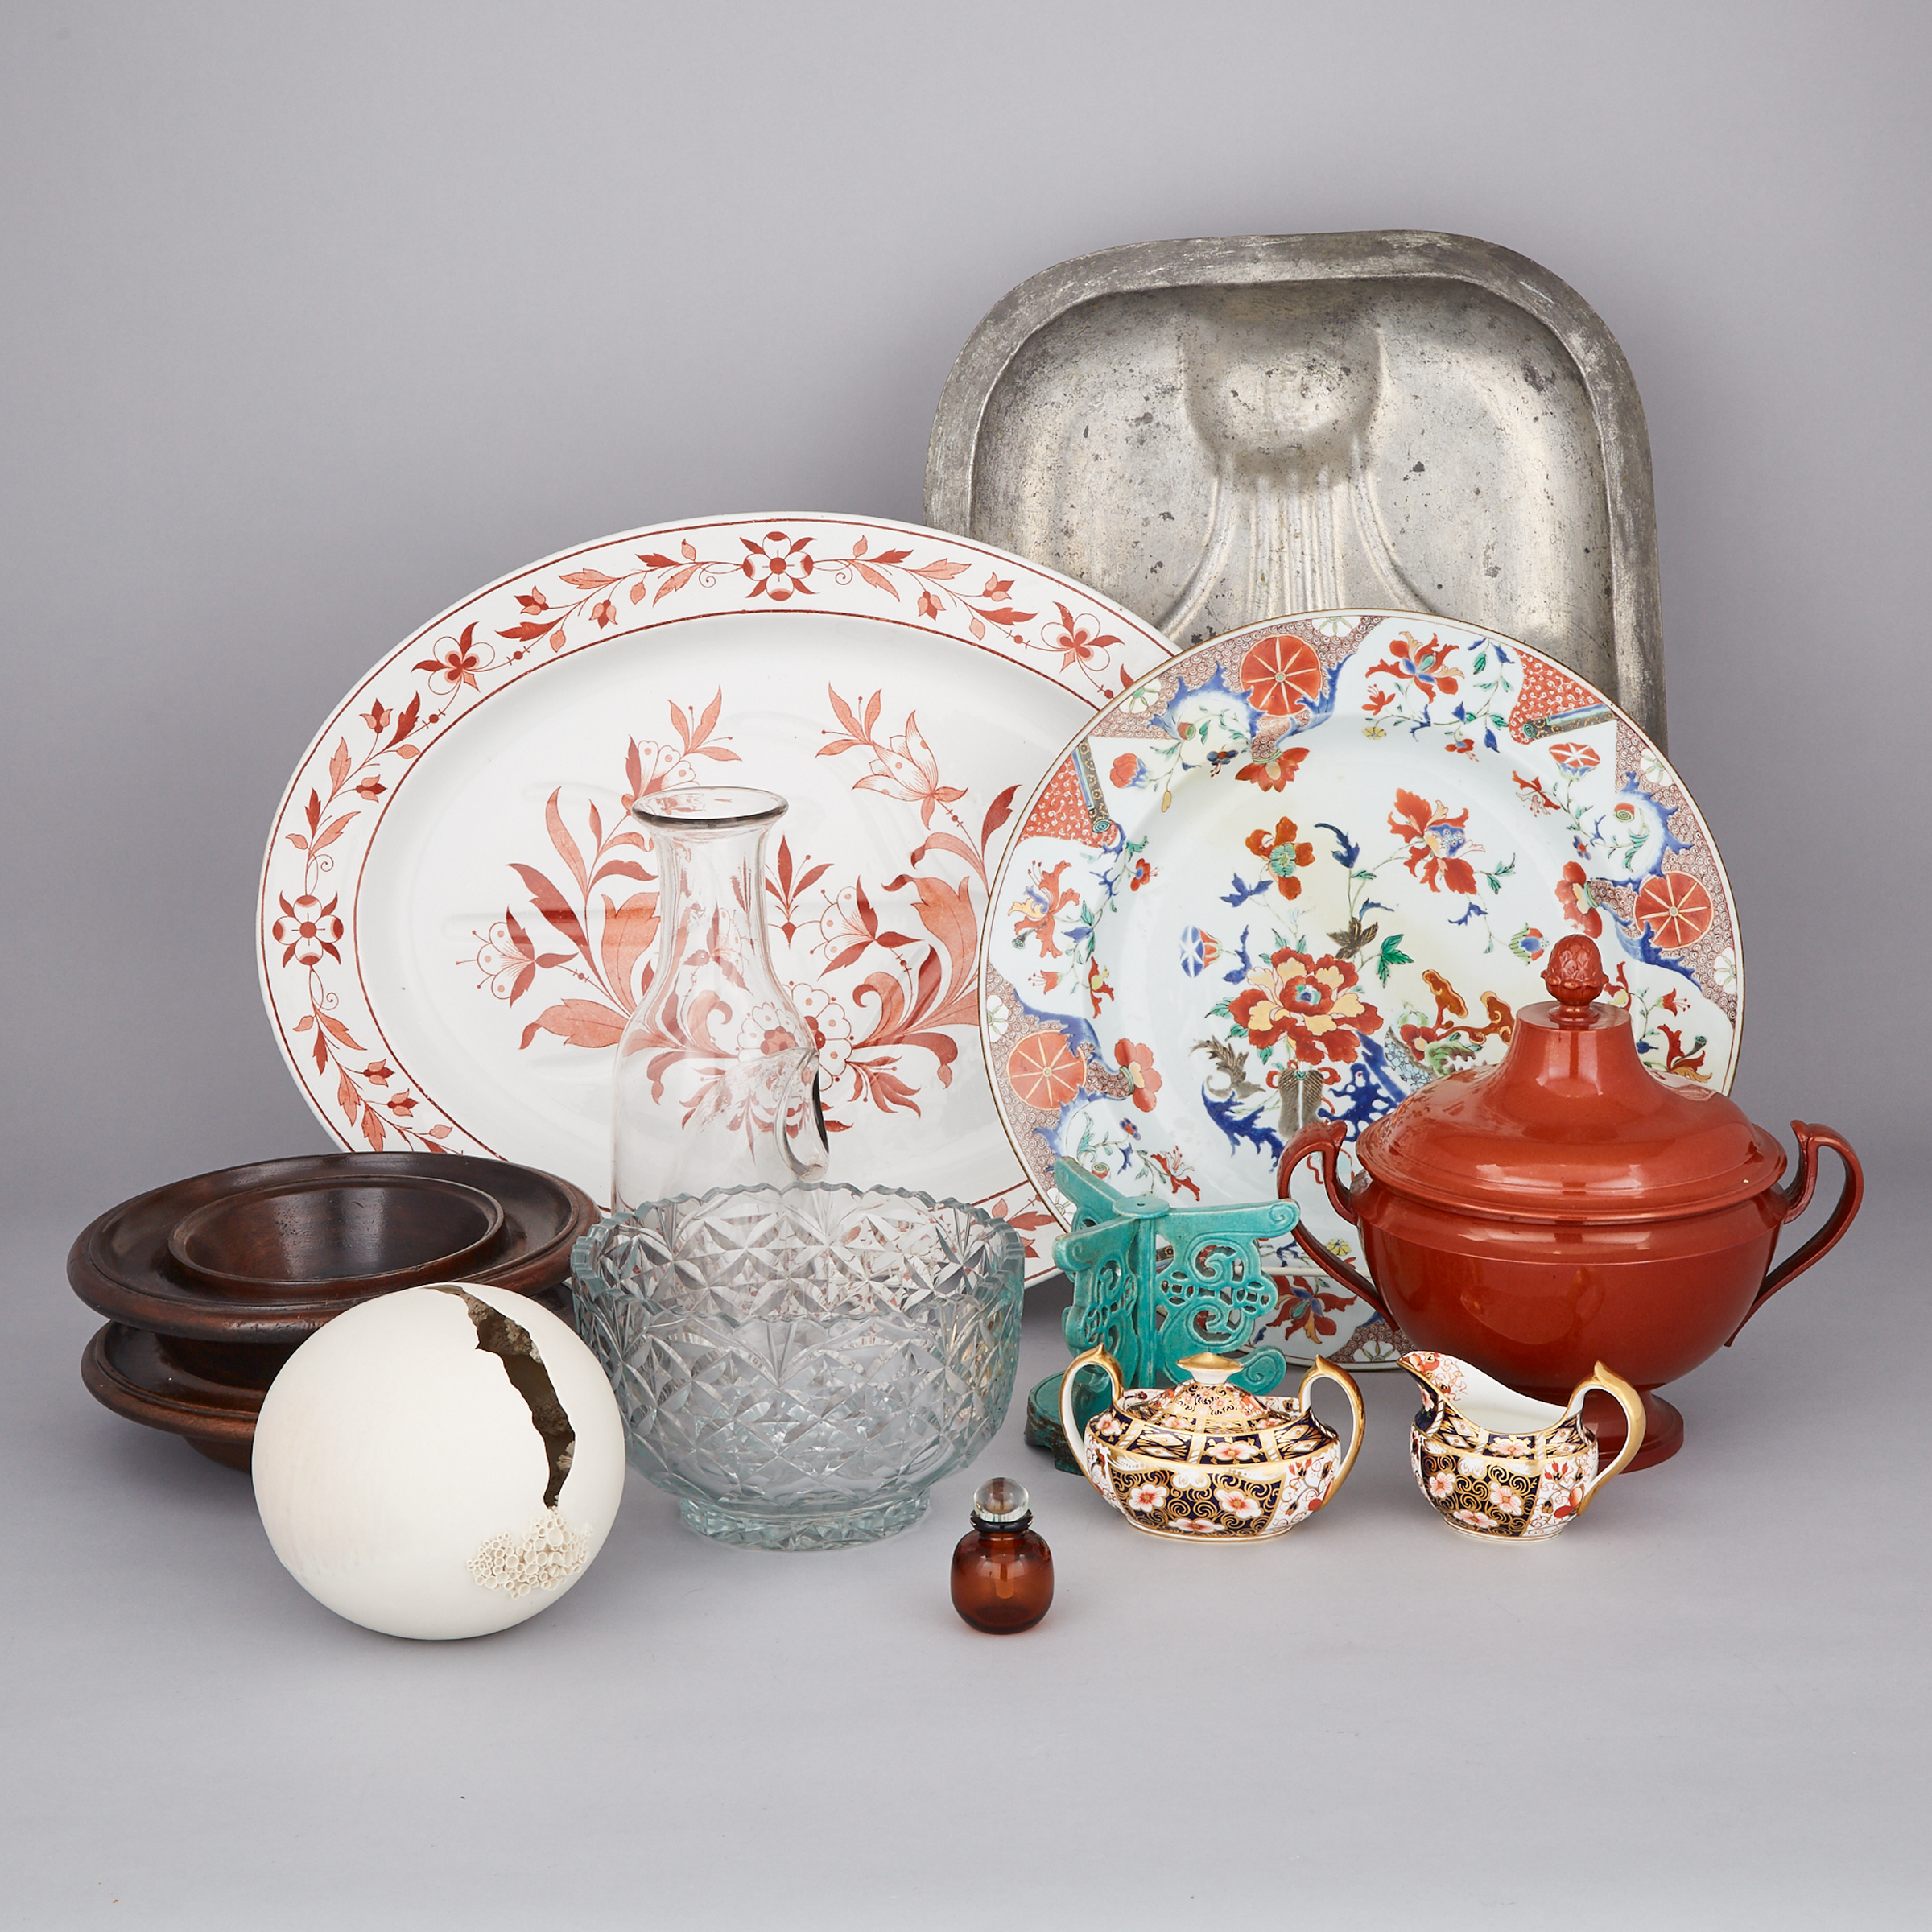 Group of Ceramics, Glass, Wood and Metalwork, 19th/20th century